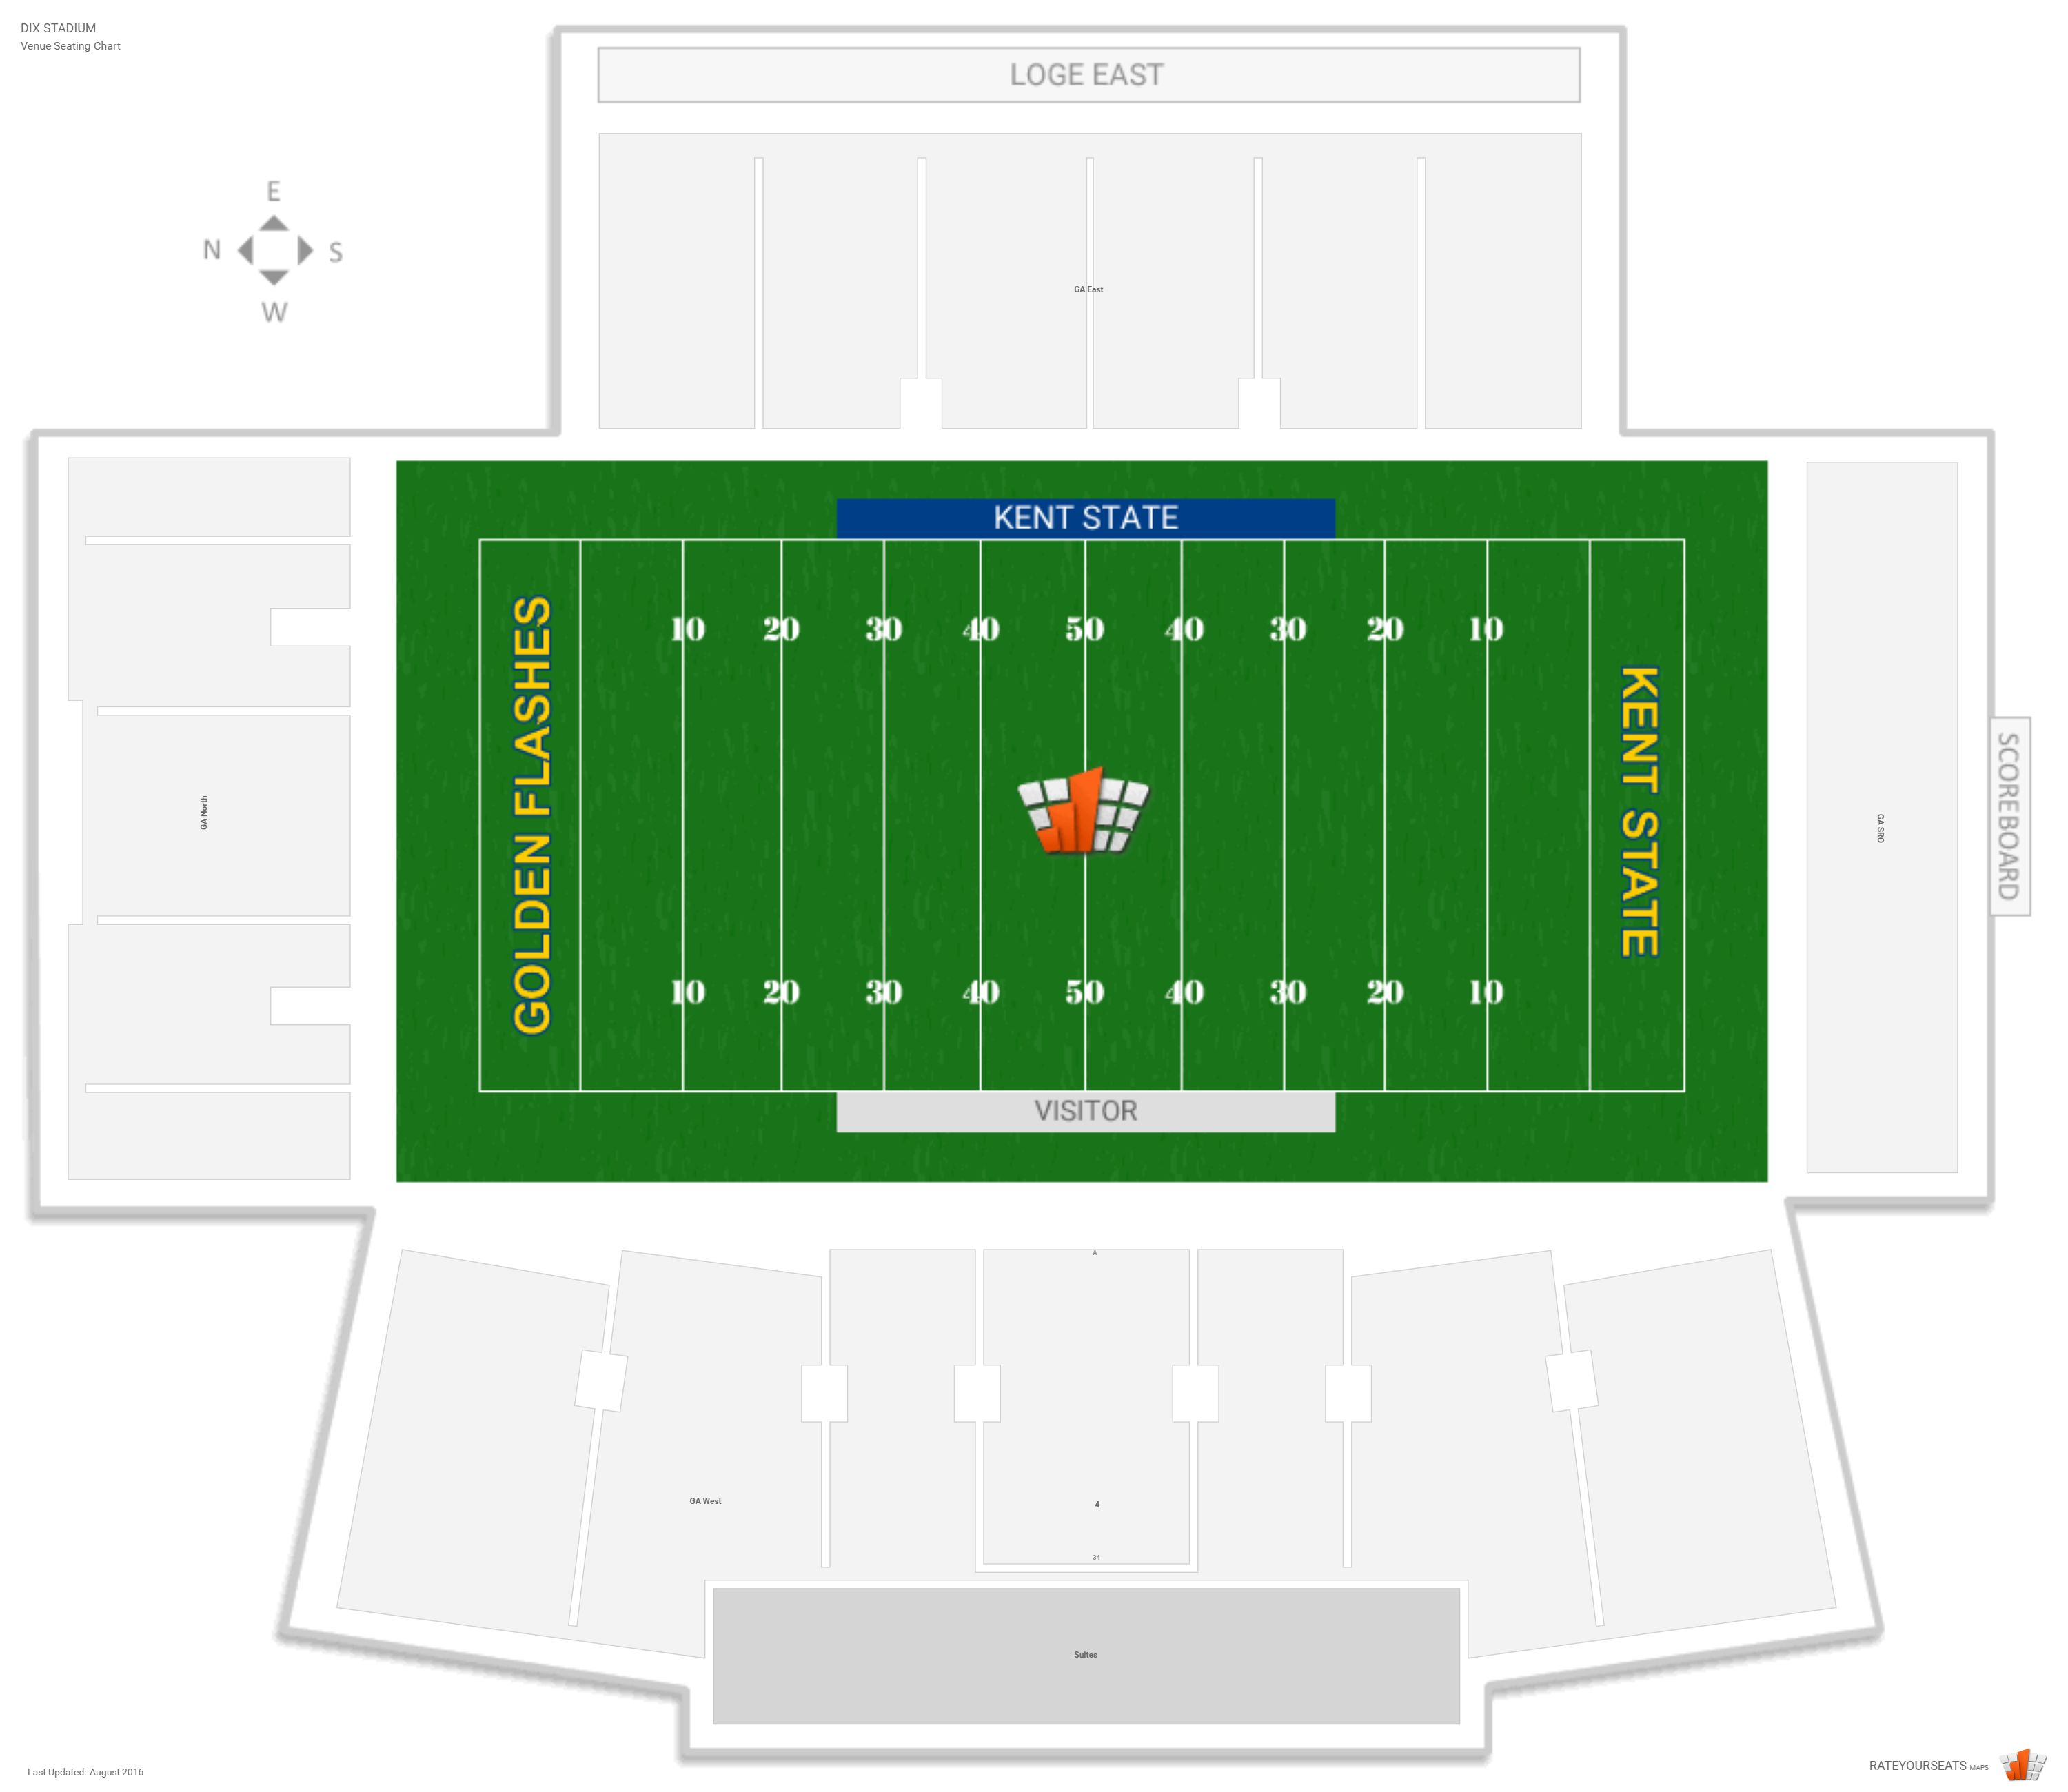 Dix Stadium (Kent State) Seating Guide - RateYourSeats.com